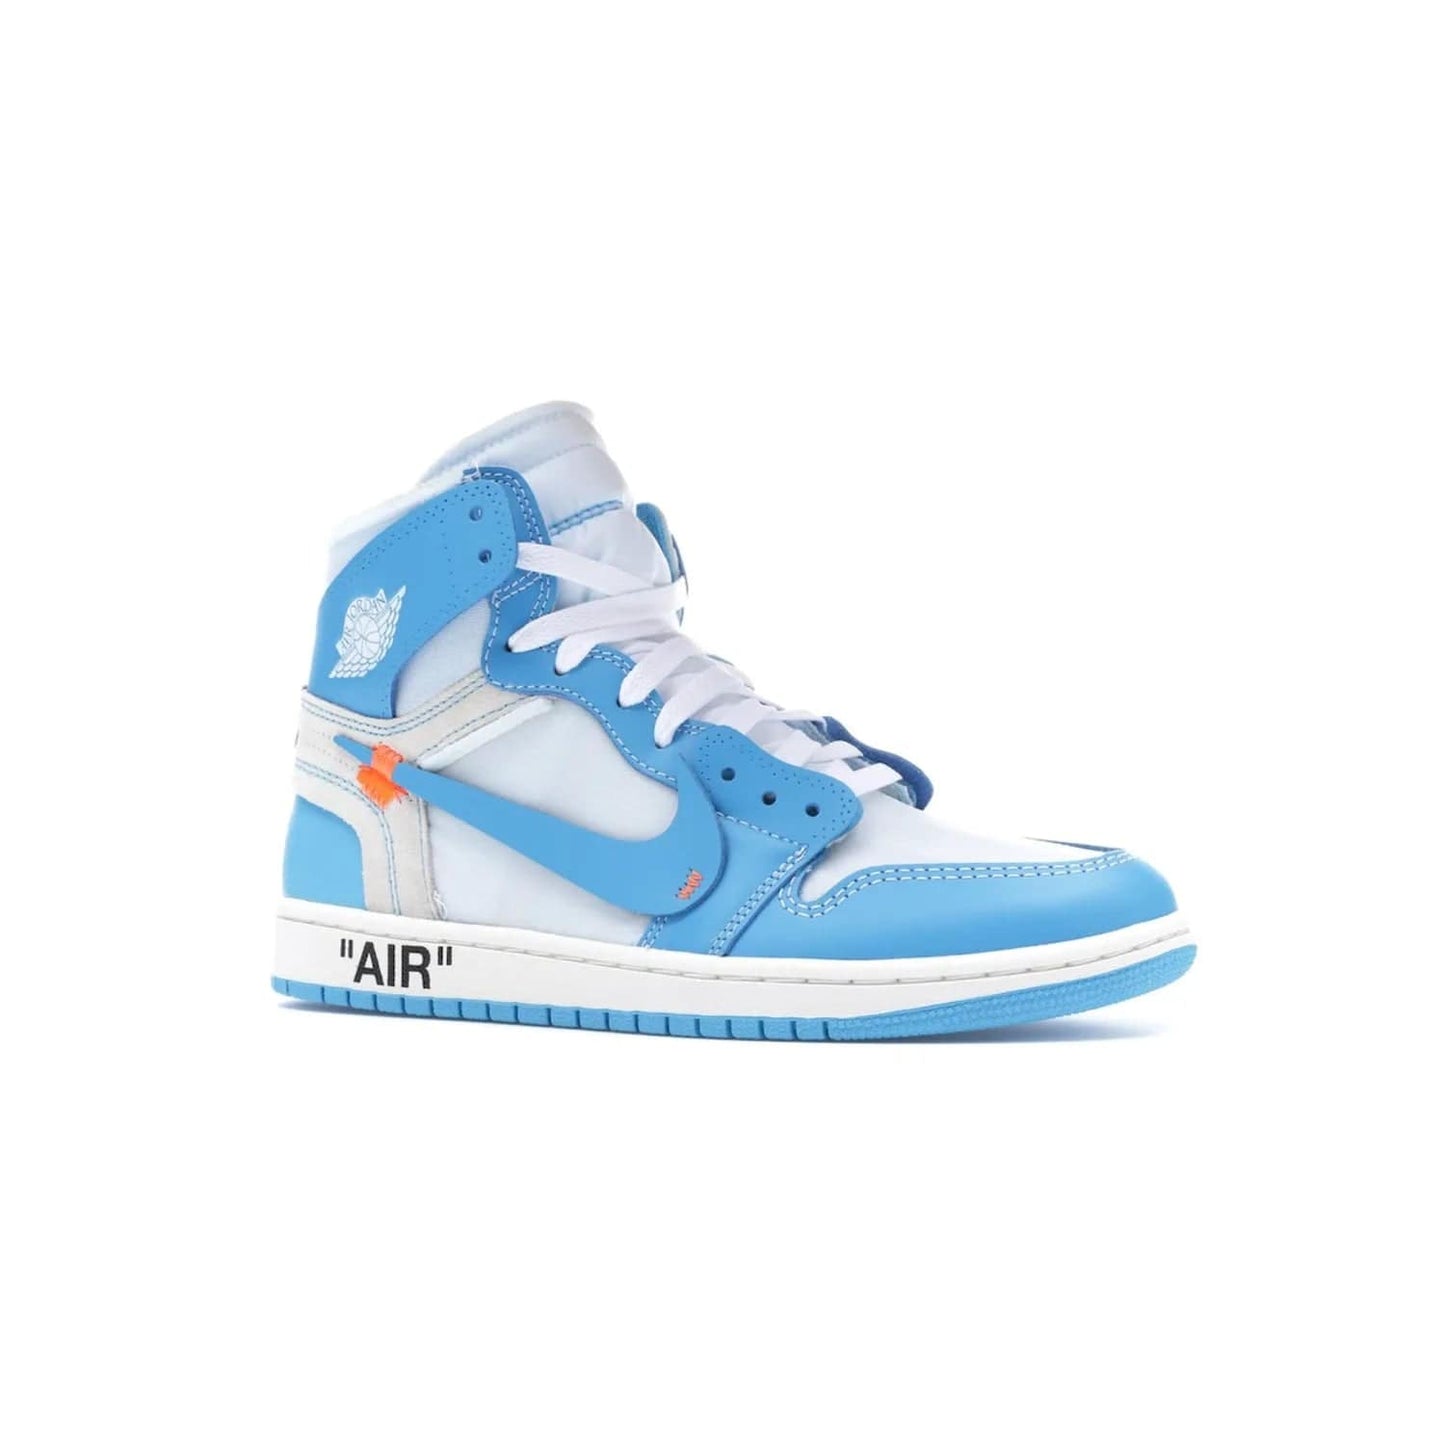 Jordan 1 Retro High Off-White University Blue - Image 4 - Only at www.BallersClubKickz.com - Classic Jordan 1 Retro High "Off-White UNC" sneakers meld style and comfort. Boasting deconstructed white and blue leather, Off-White detailing, and a white, dark powder blue and cone colorway, these sneakers are perfect for dressing up or down. Get the iconic Off-White Jordan 1's and upgrade your look.